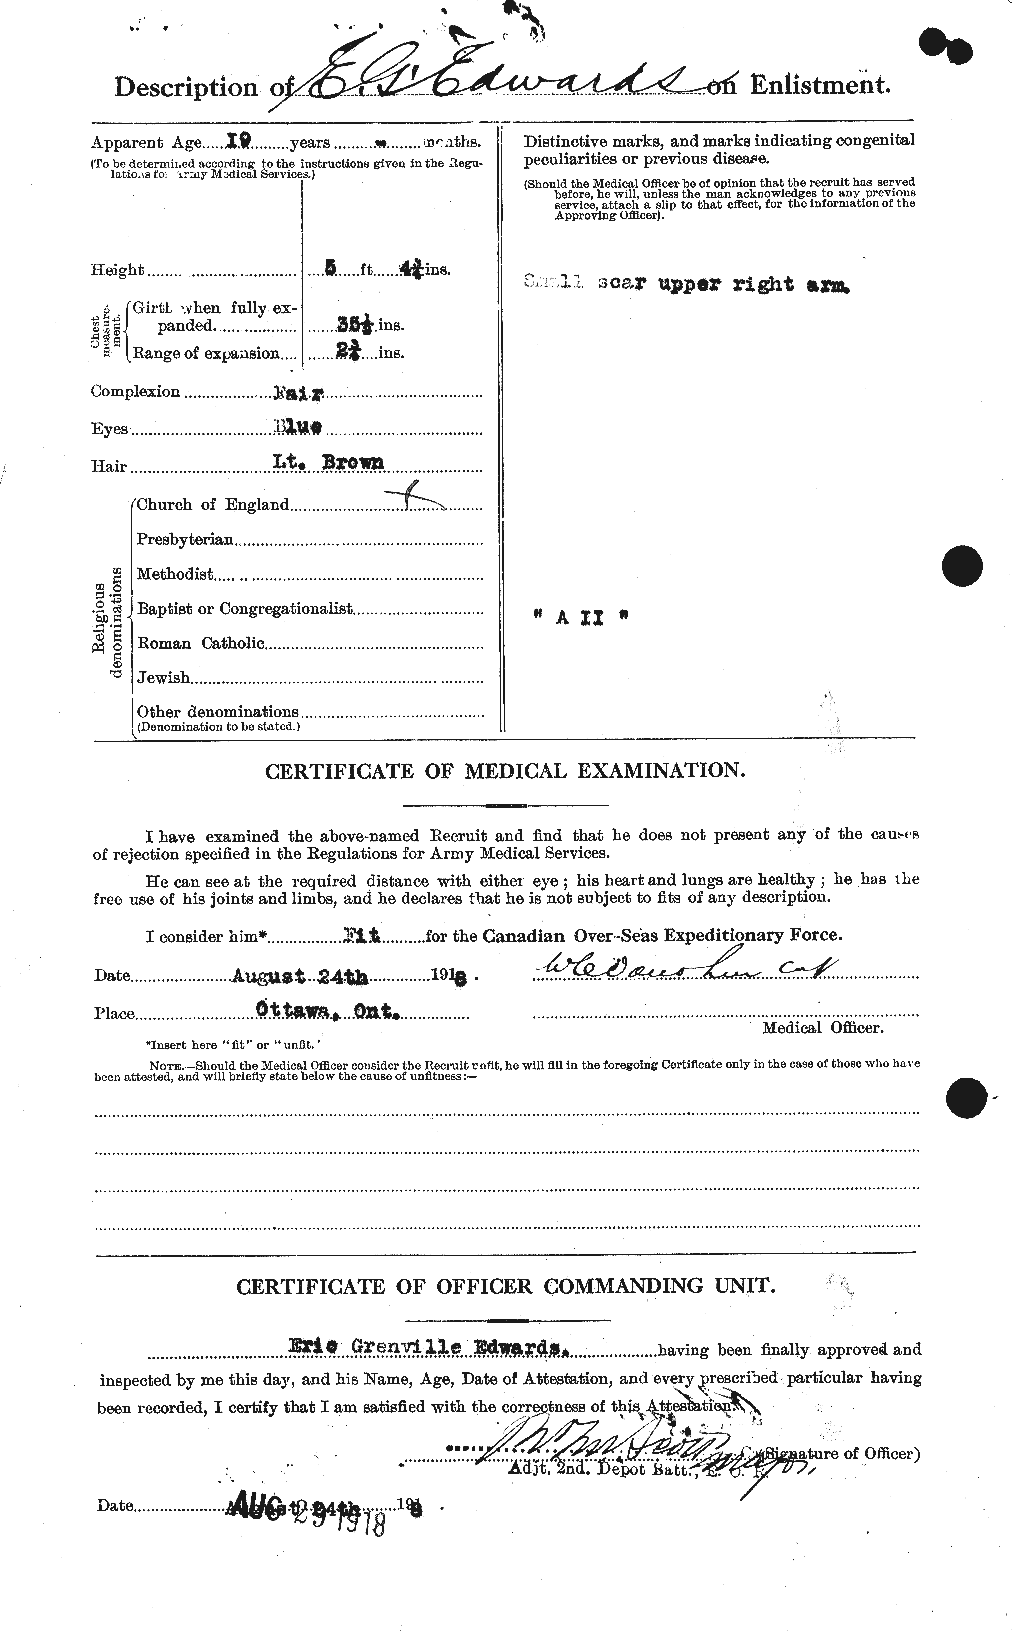 Personnel Records of the First World War - CEF 307919b